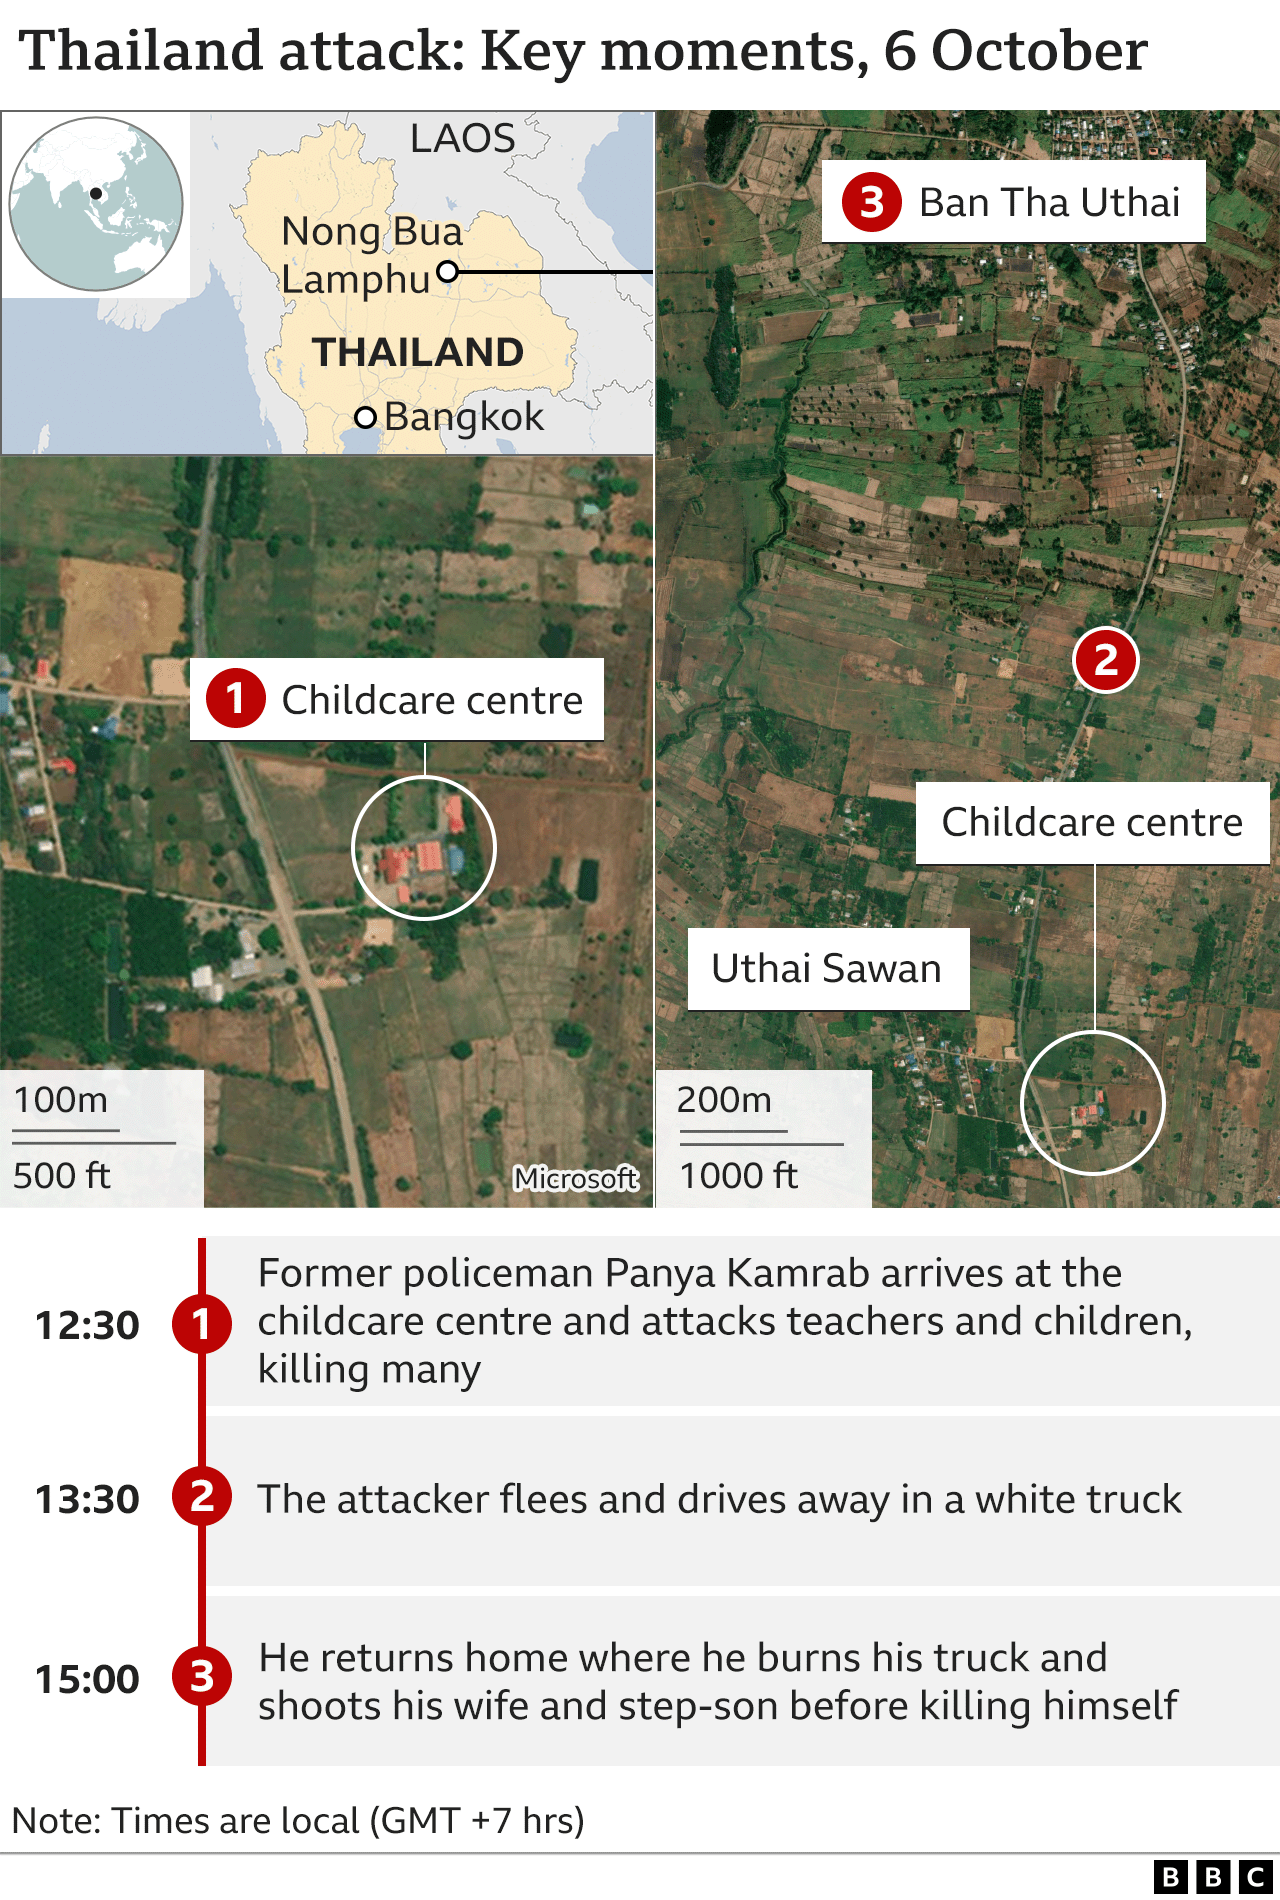 Map of attacks and timeline